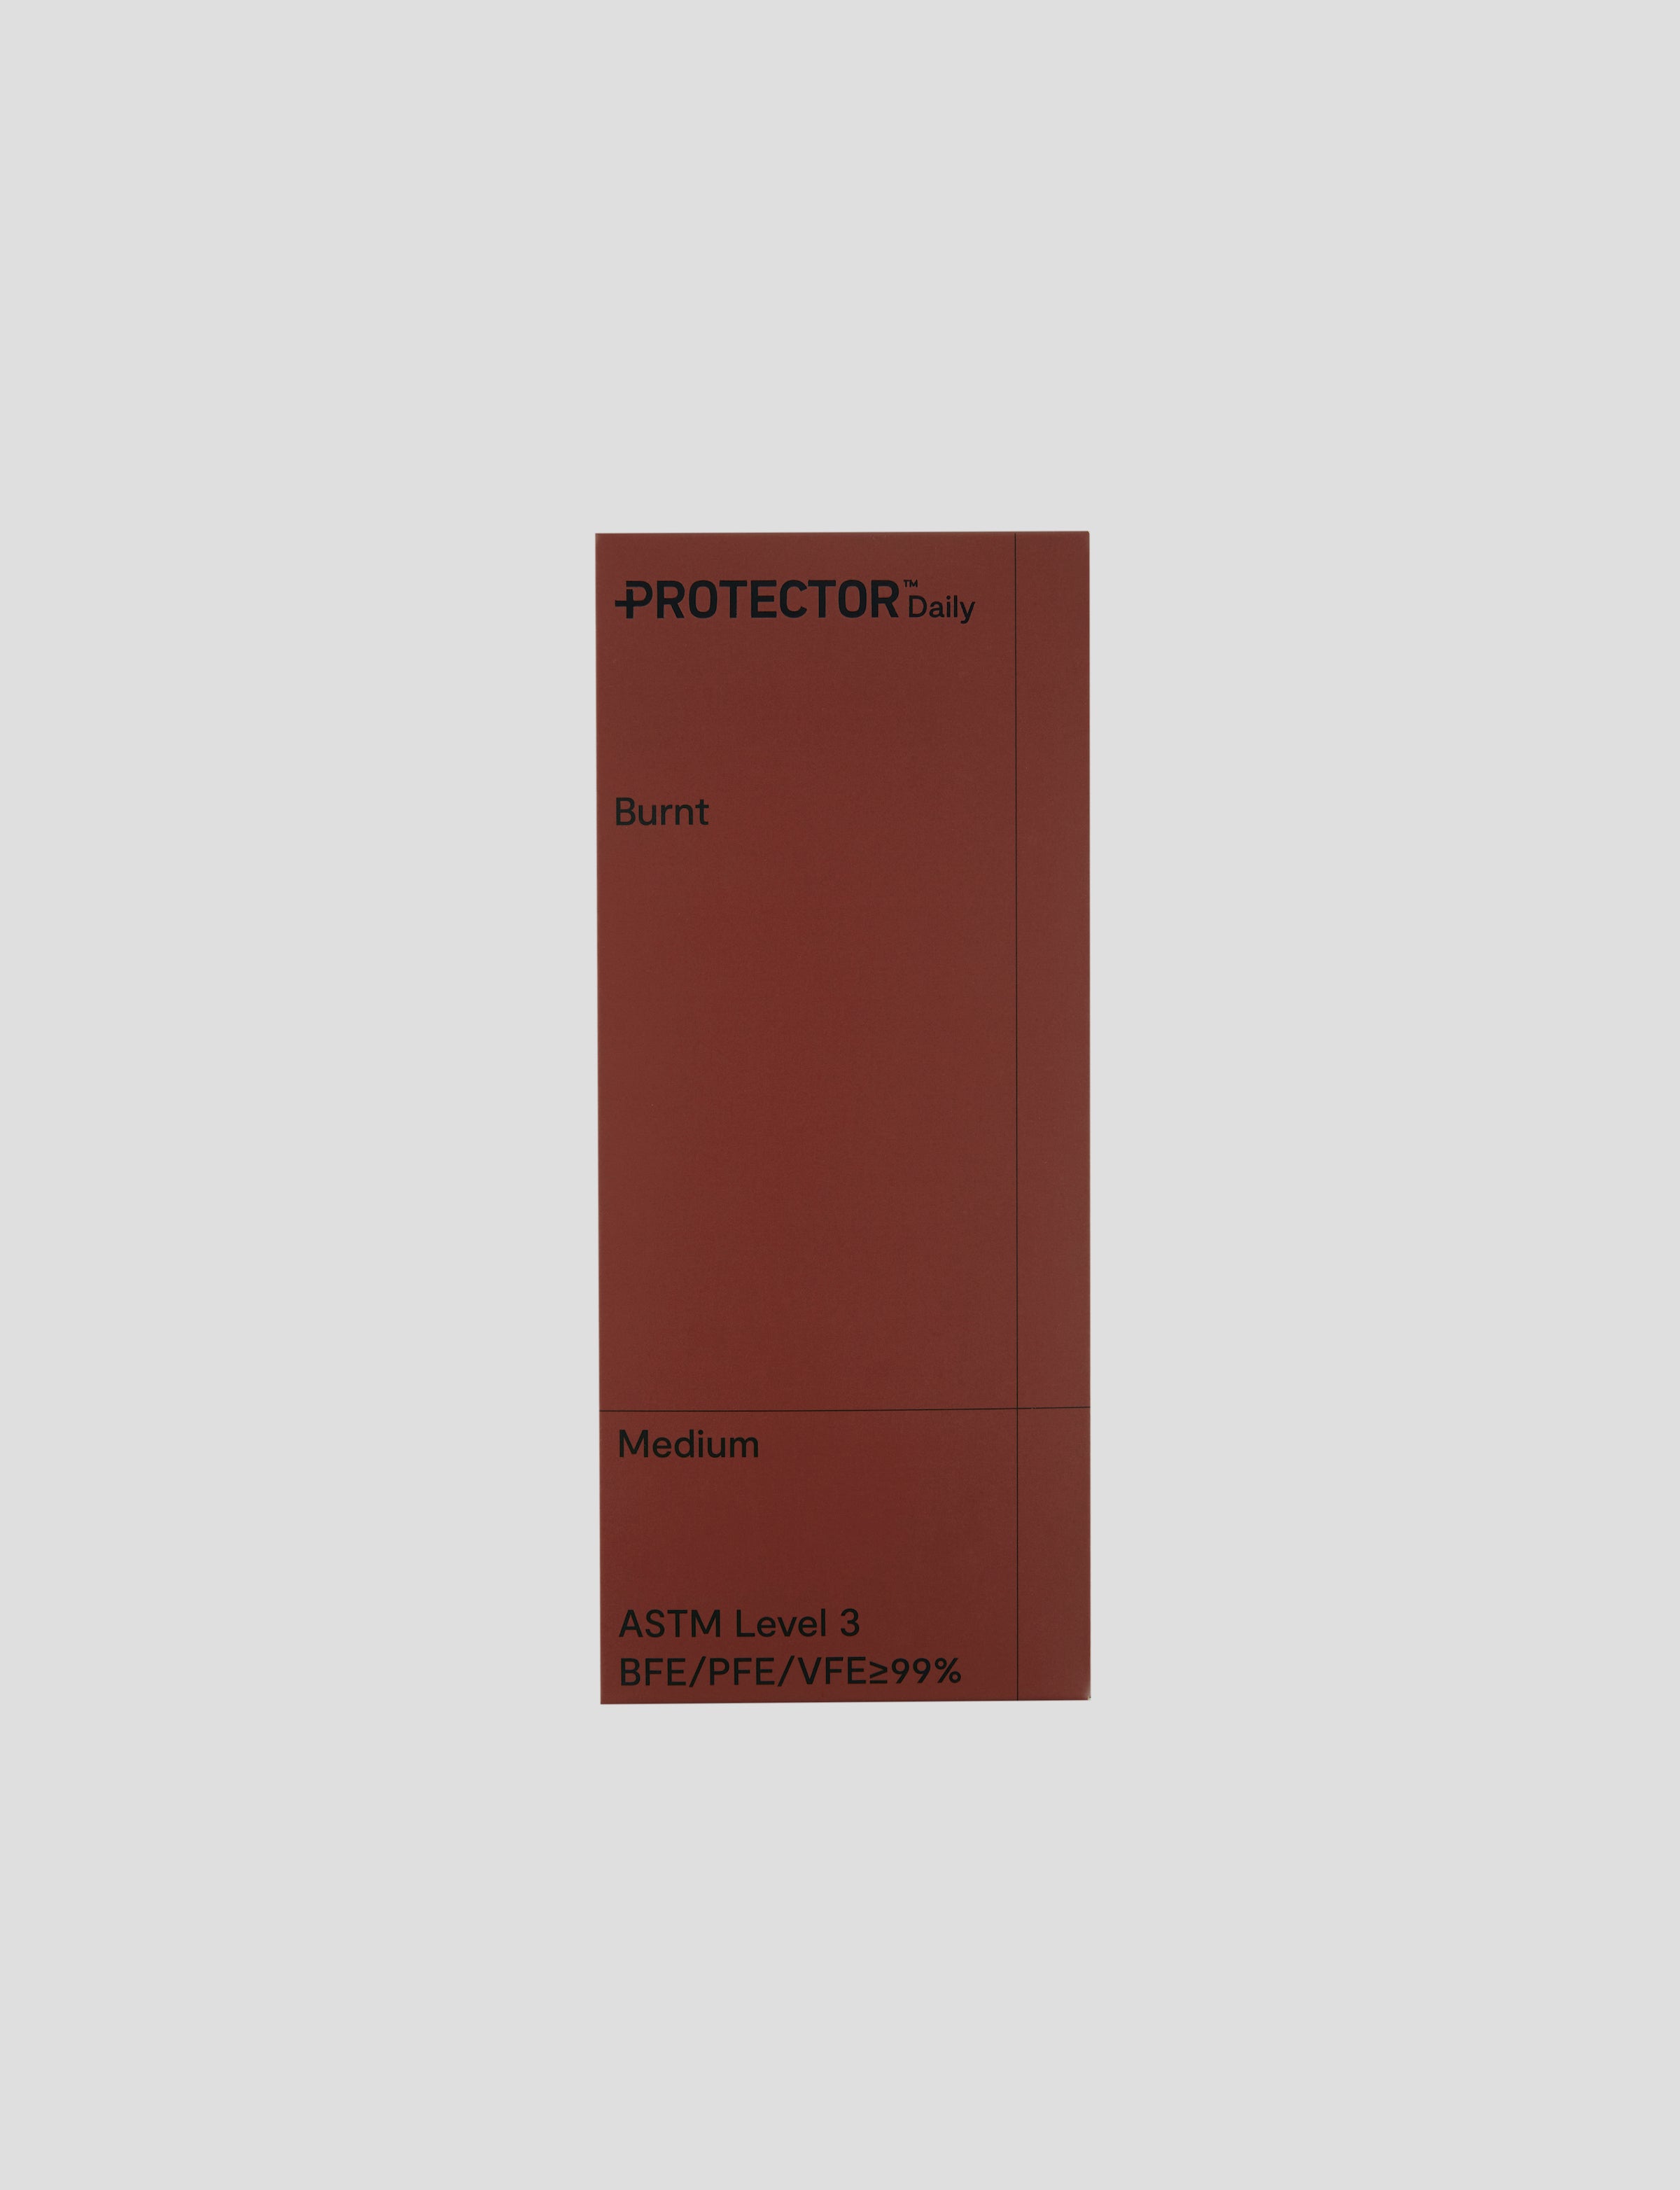 Protector Daily Face Mask，焦香啡